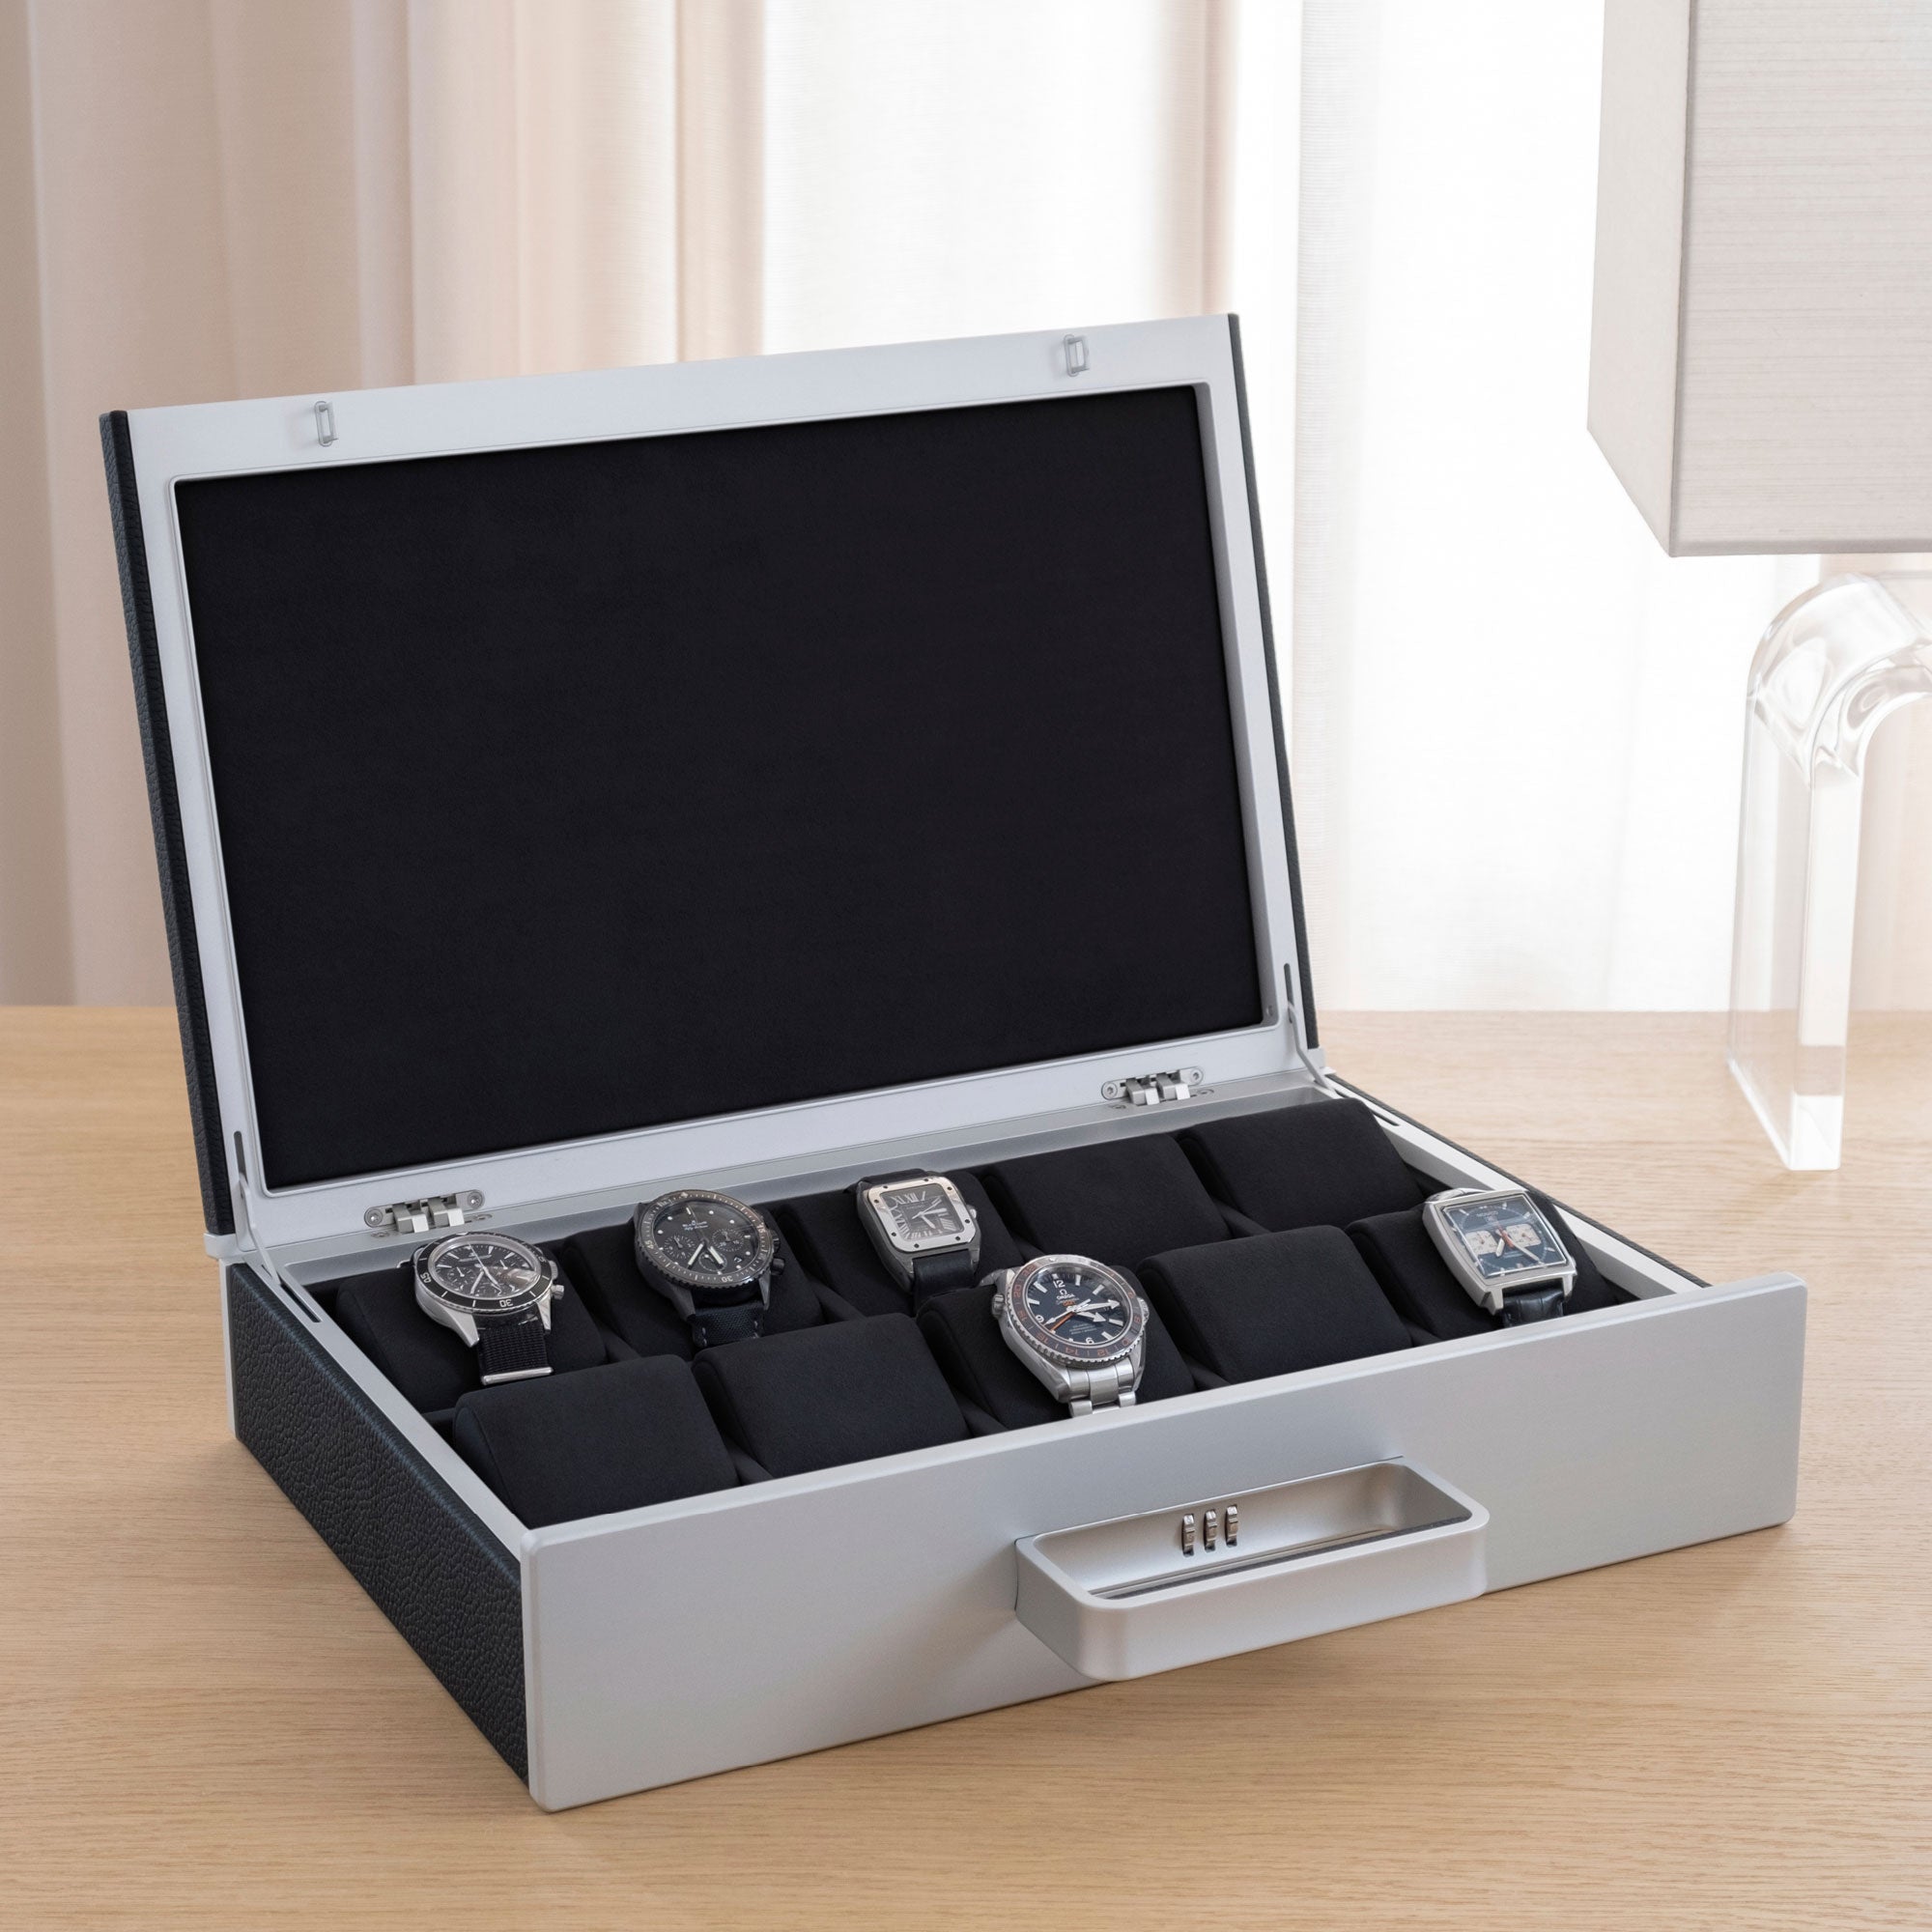 Designer Watch briefcase for 10 watches in black leather, carbon fiber and grey anodized aluminum and notte Alcantara interior with luxury watches including Cartier, Omega and Jaeger-LeCoultre